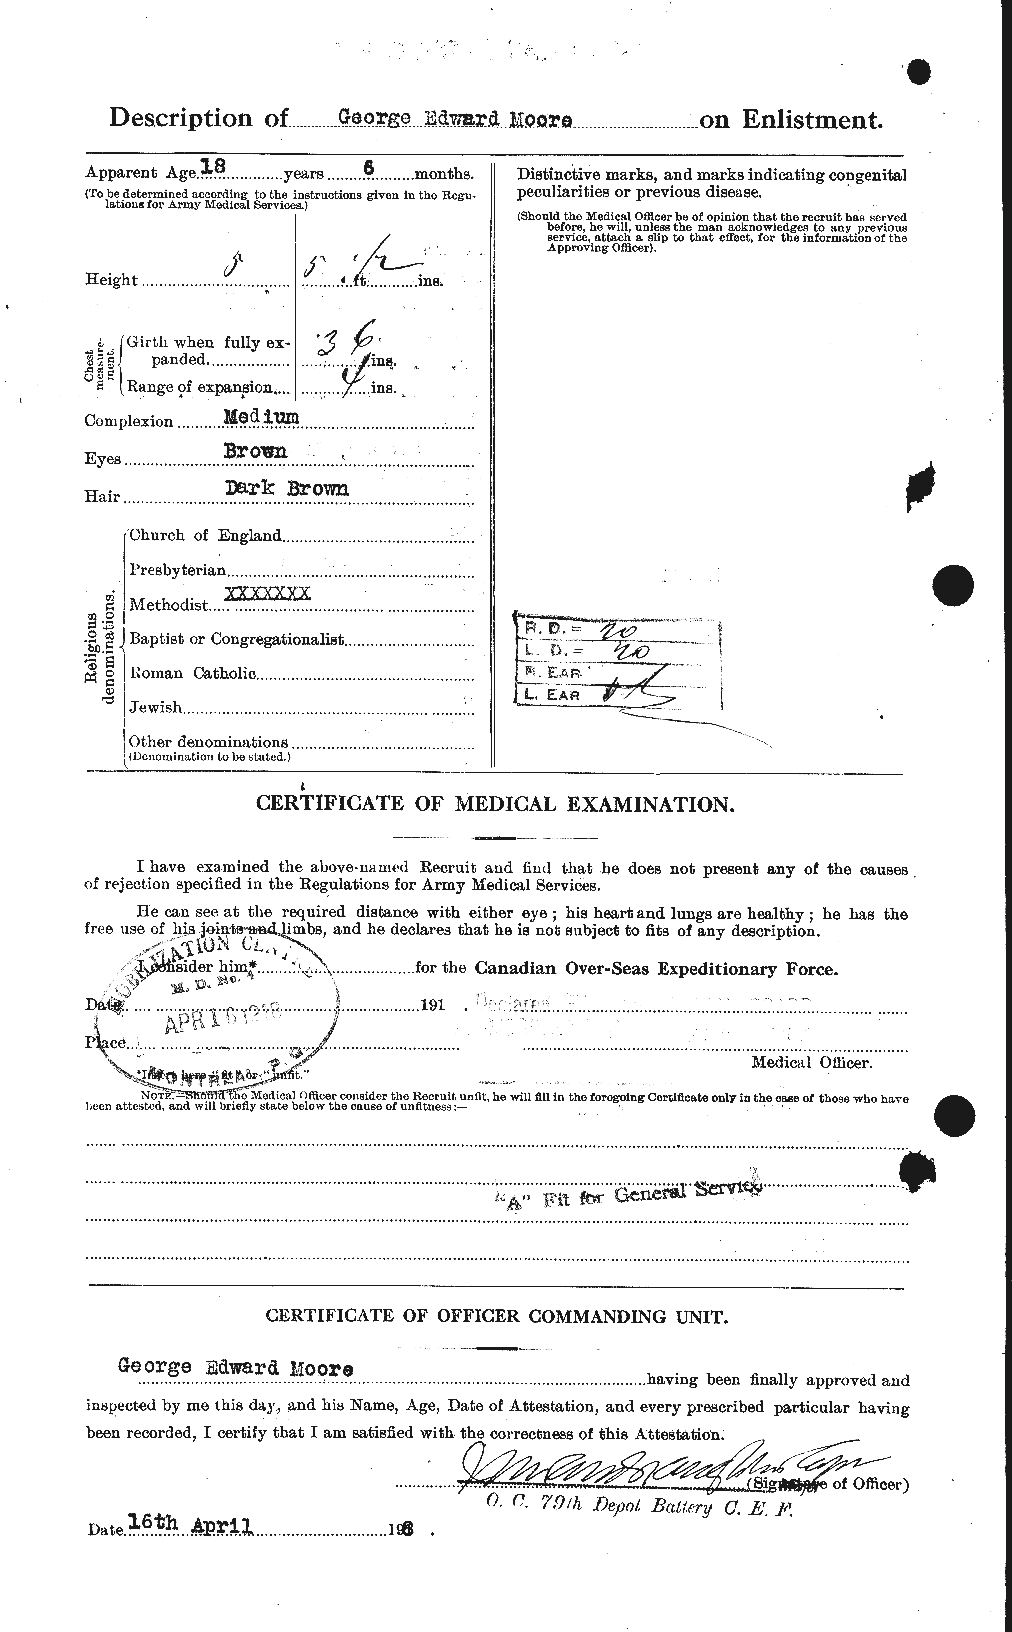 Personnel Records of the First World War - CEF 501997b